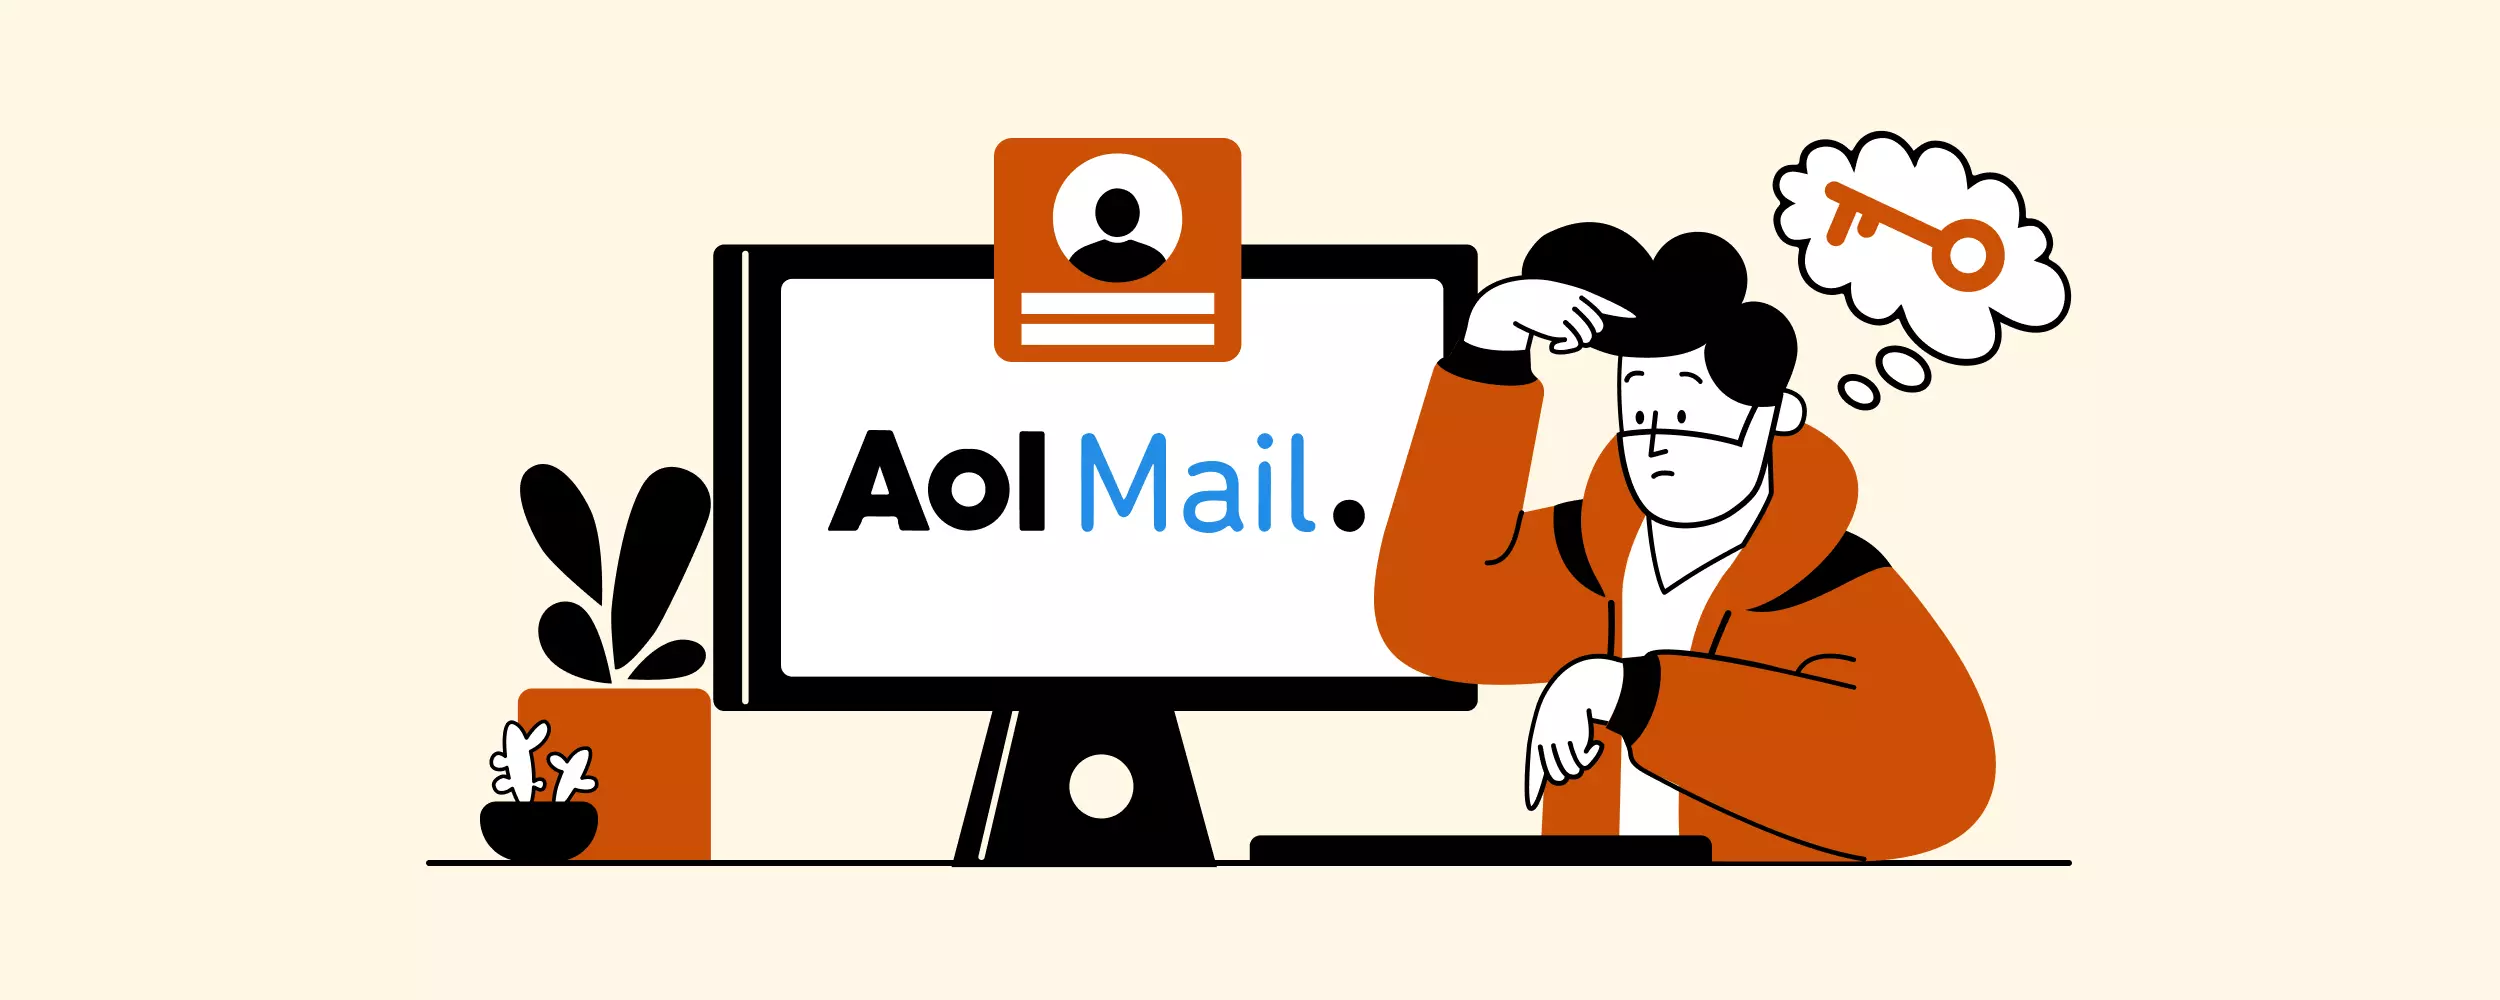 How to Generate an AOL App Password from Your Account